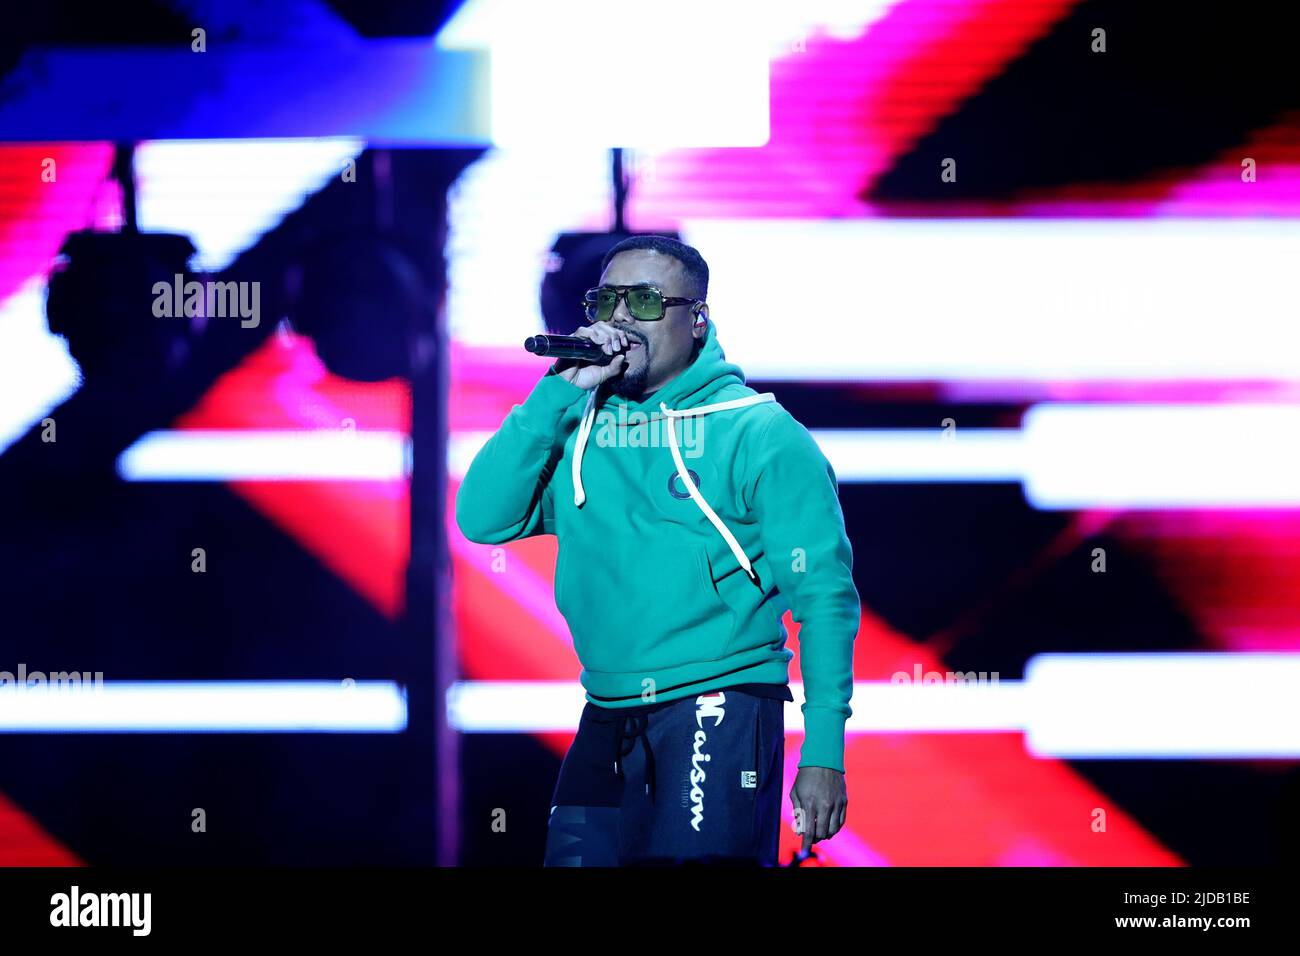 June 19, 2022, Lisbon, Portugal: Apl.de.ap of US band Black Eyed Peas performs during the Rock in Rio Lisboa 2022 music festival in Lisbon, Portugal, on June 19, 2022. (Credit Image: © Pedro Fiuza/ZUMA Press Wire) Stock Photo